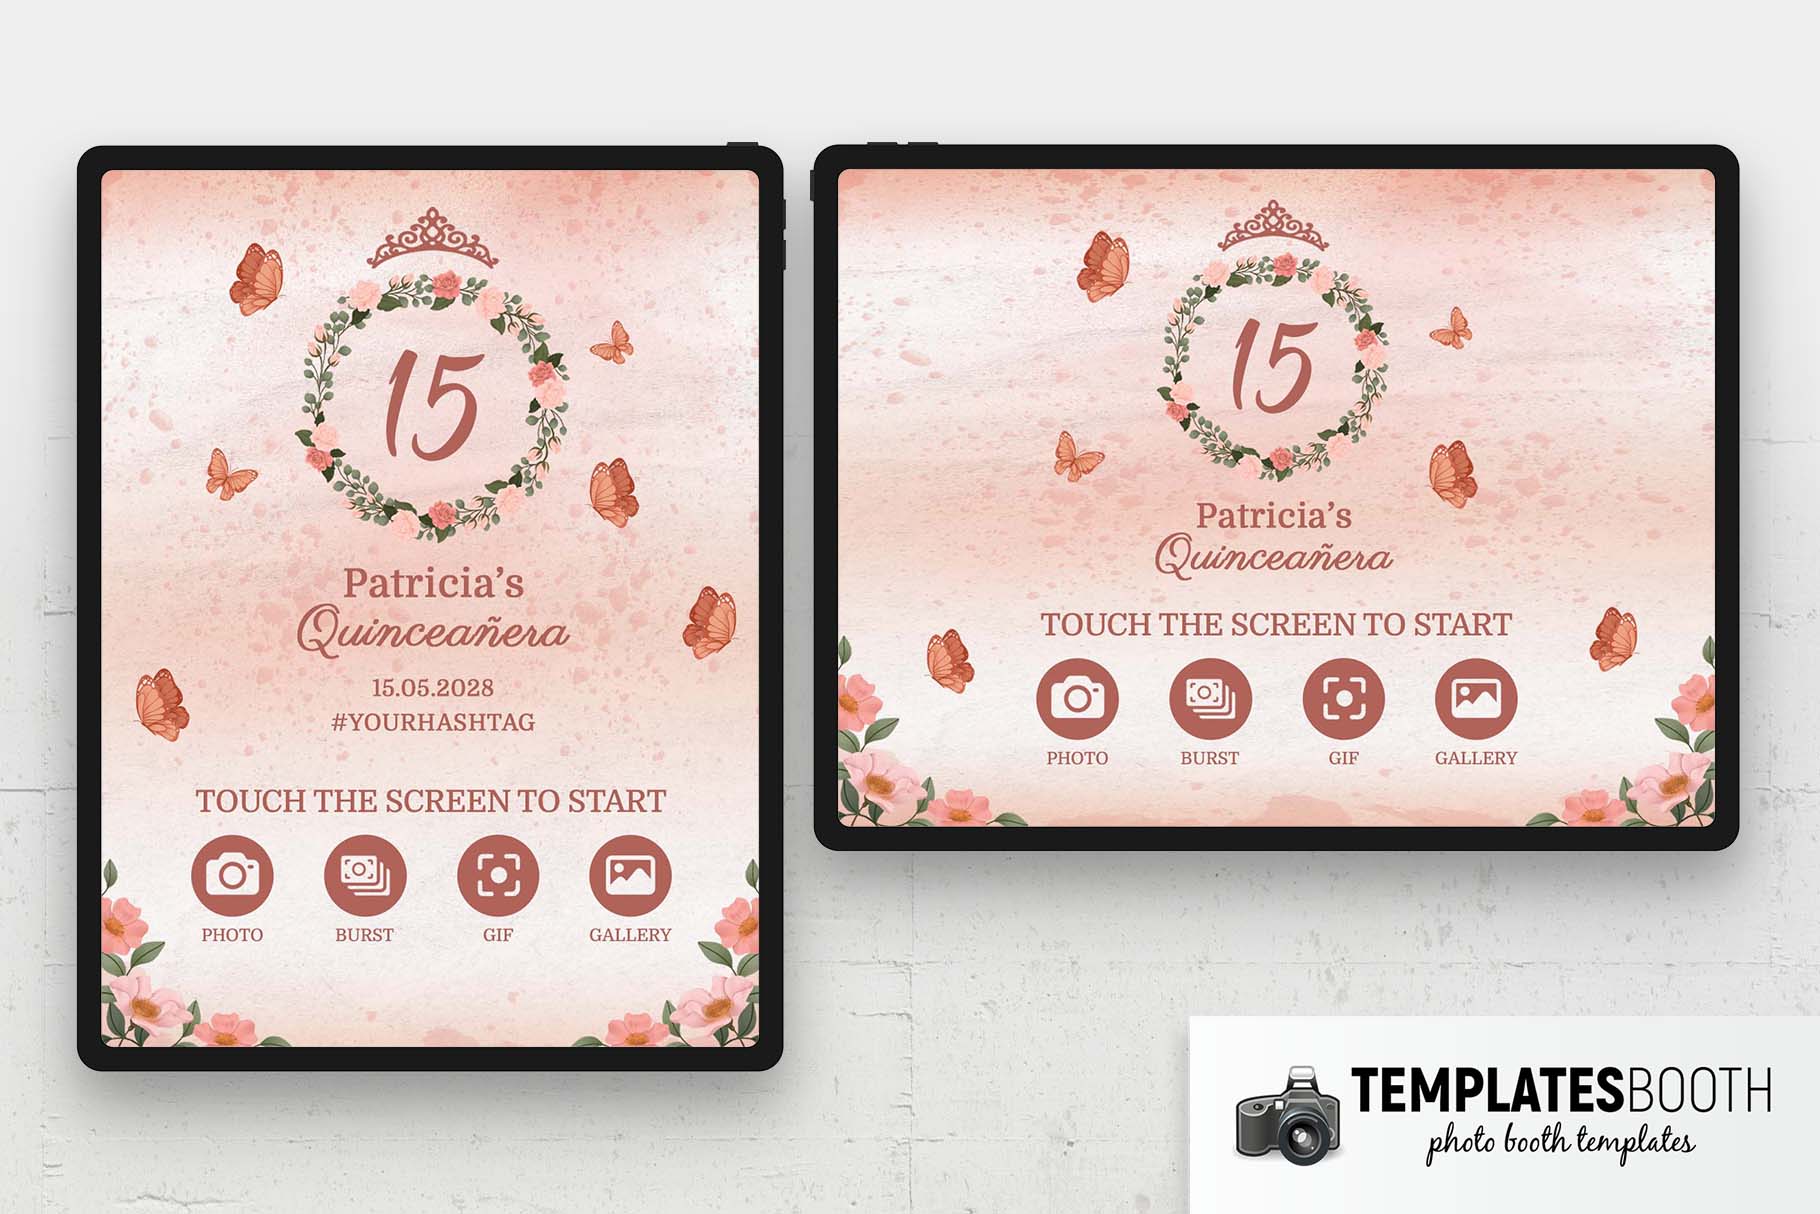 Floral Quinceañera Photo Booth Welcome Screen